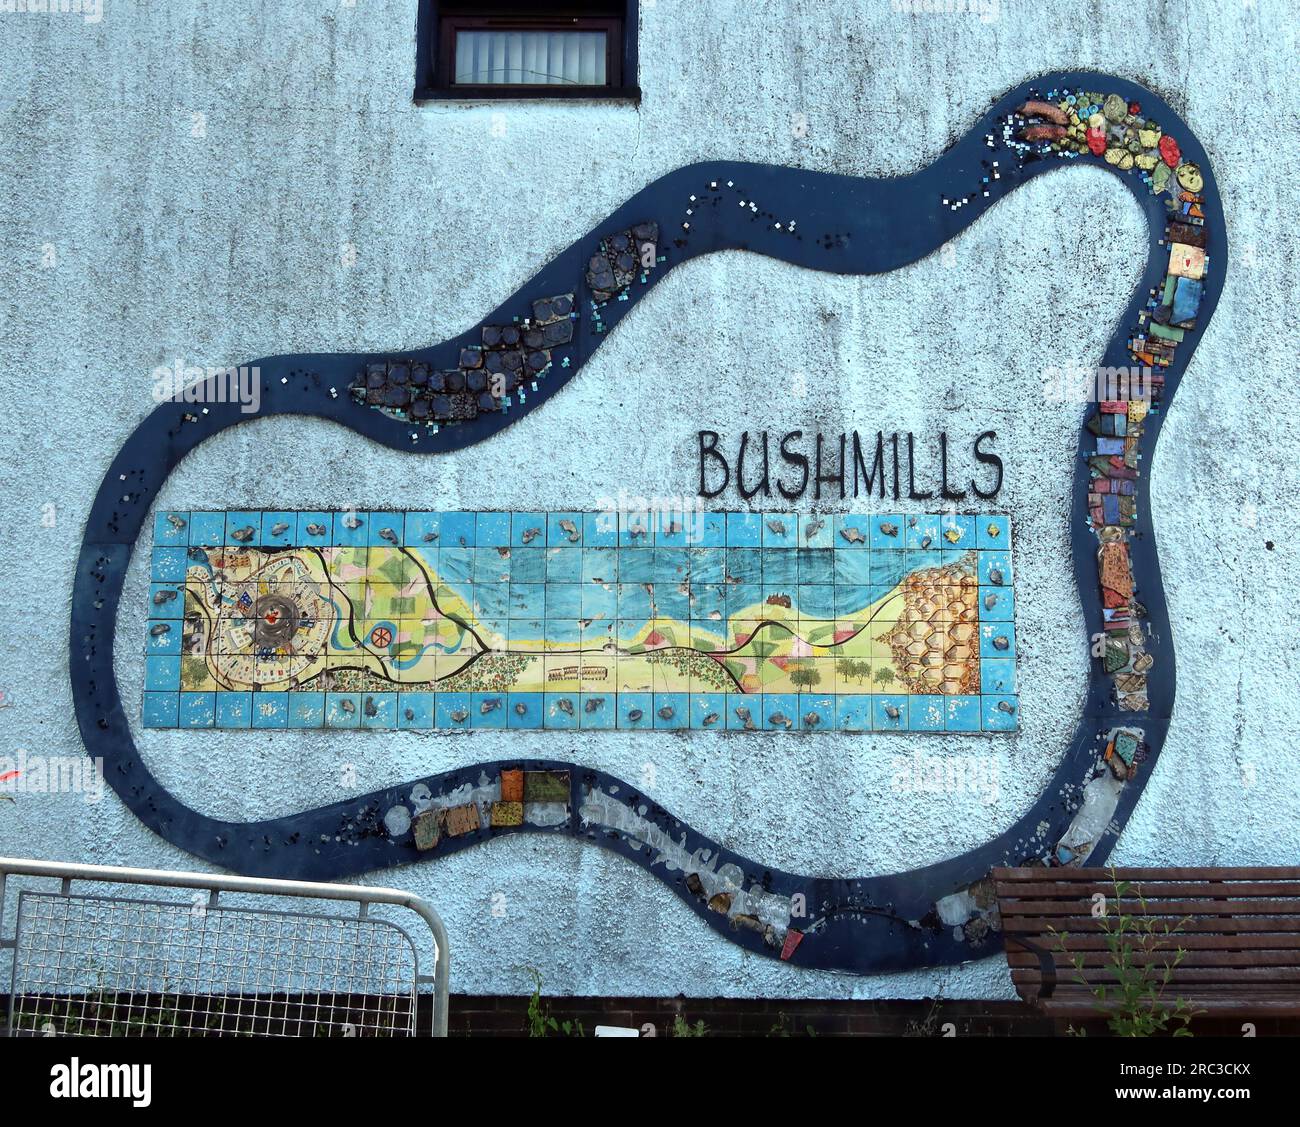 Tourist murals in Bushmills, showing the village and nearby attractions,  Riverside Ct, Bushmills, County Antrim, Northern Ireland, UK,  BT57 8SF Stock Photo